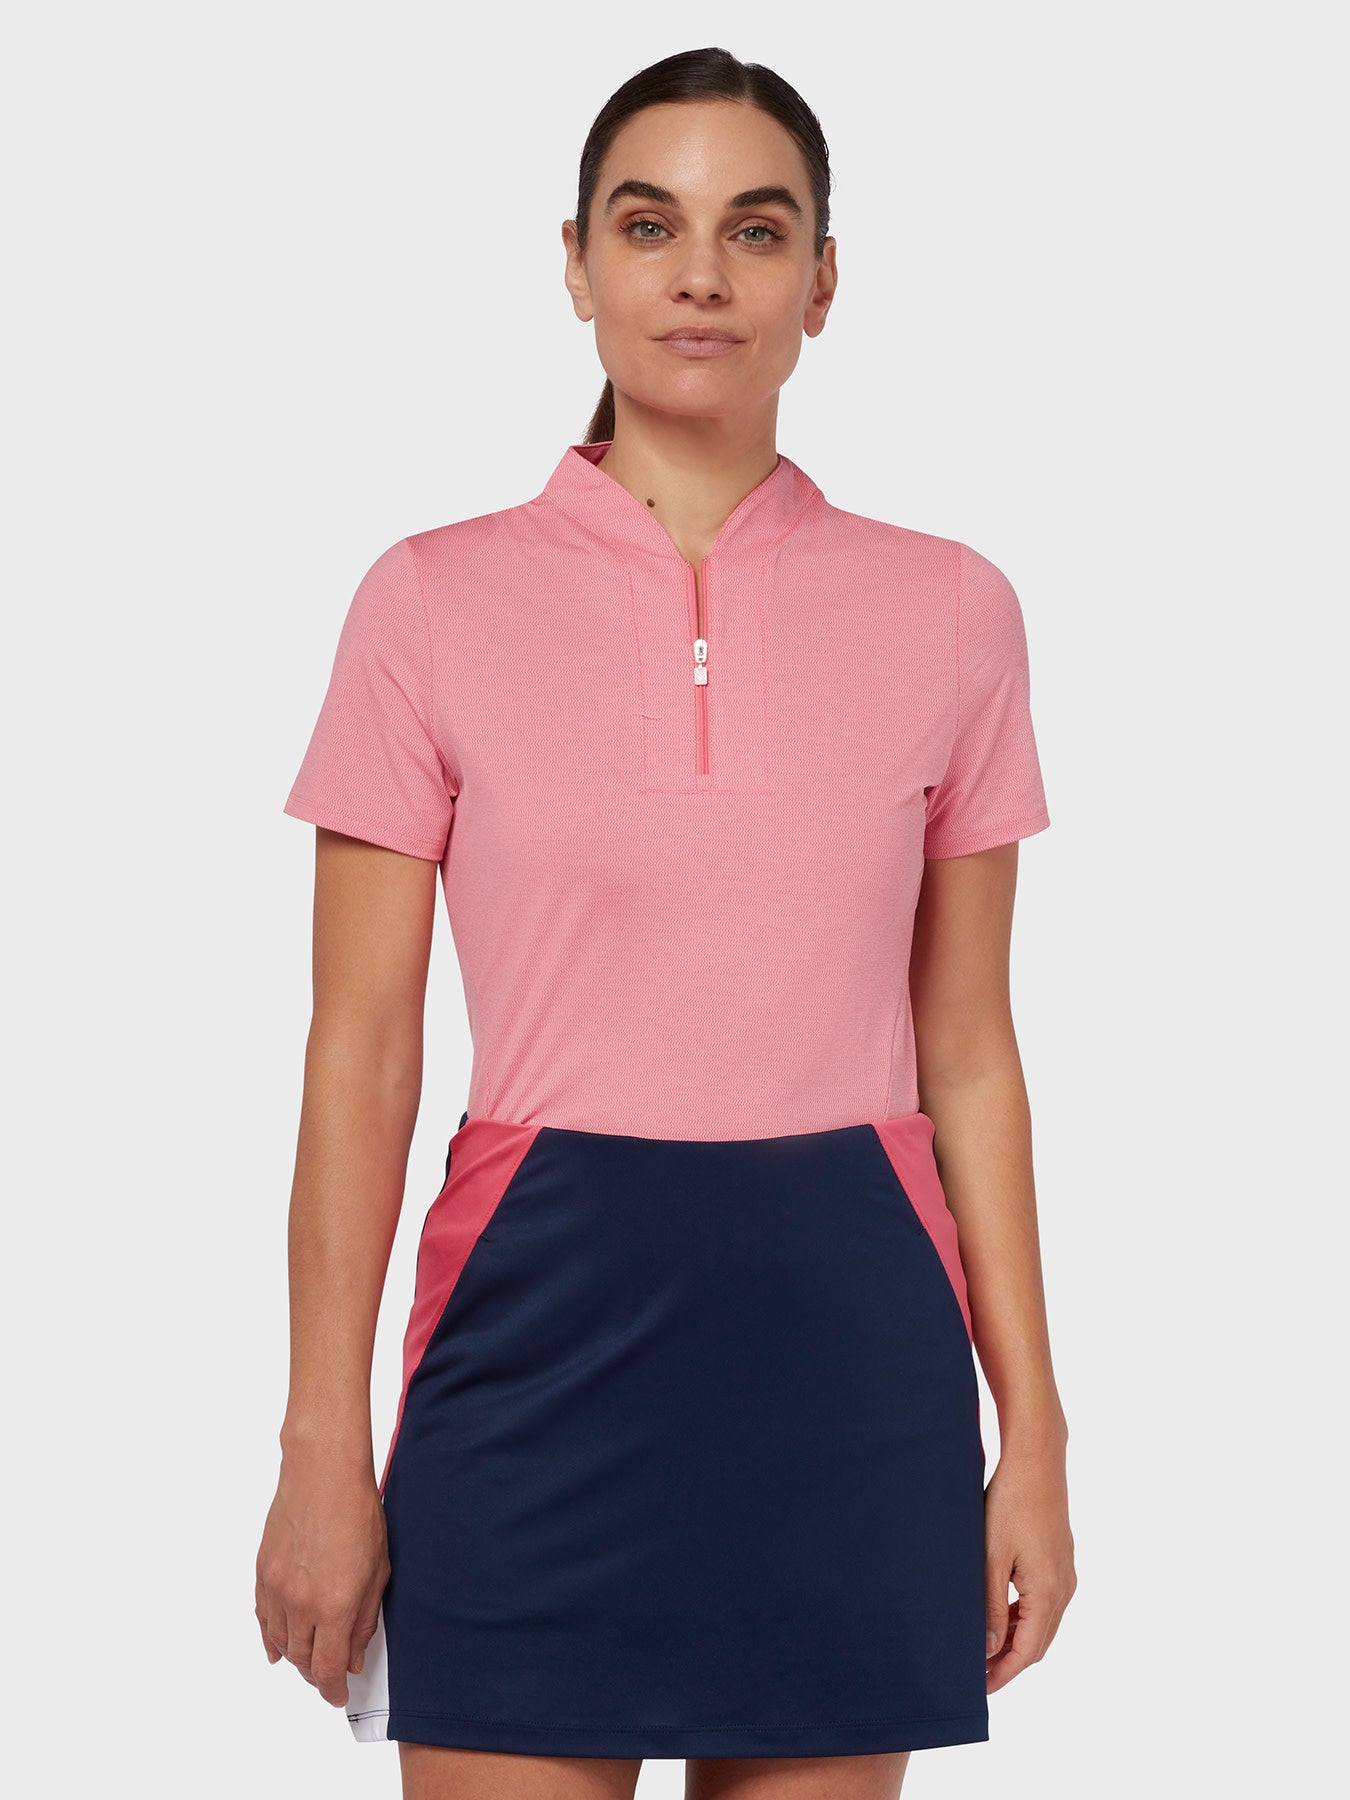 View Tonal Texture Heather Polo Top In Fruit Dove Heather Fruit Dove Htr XL information